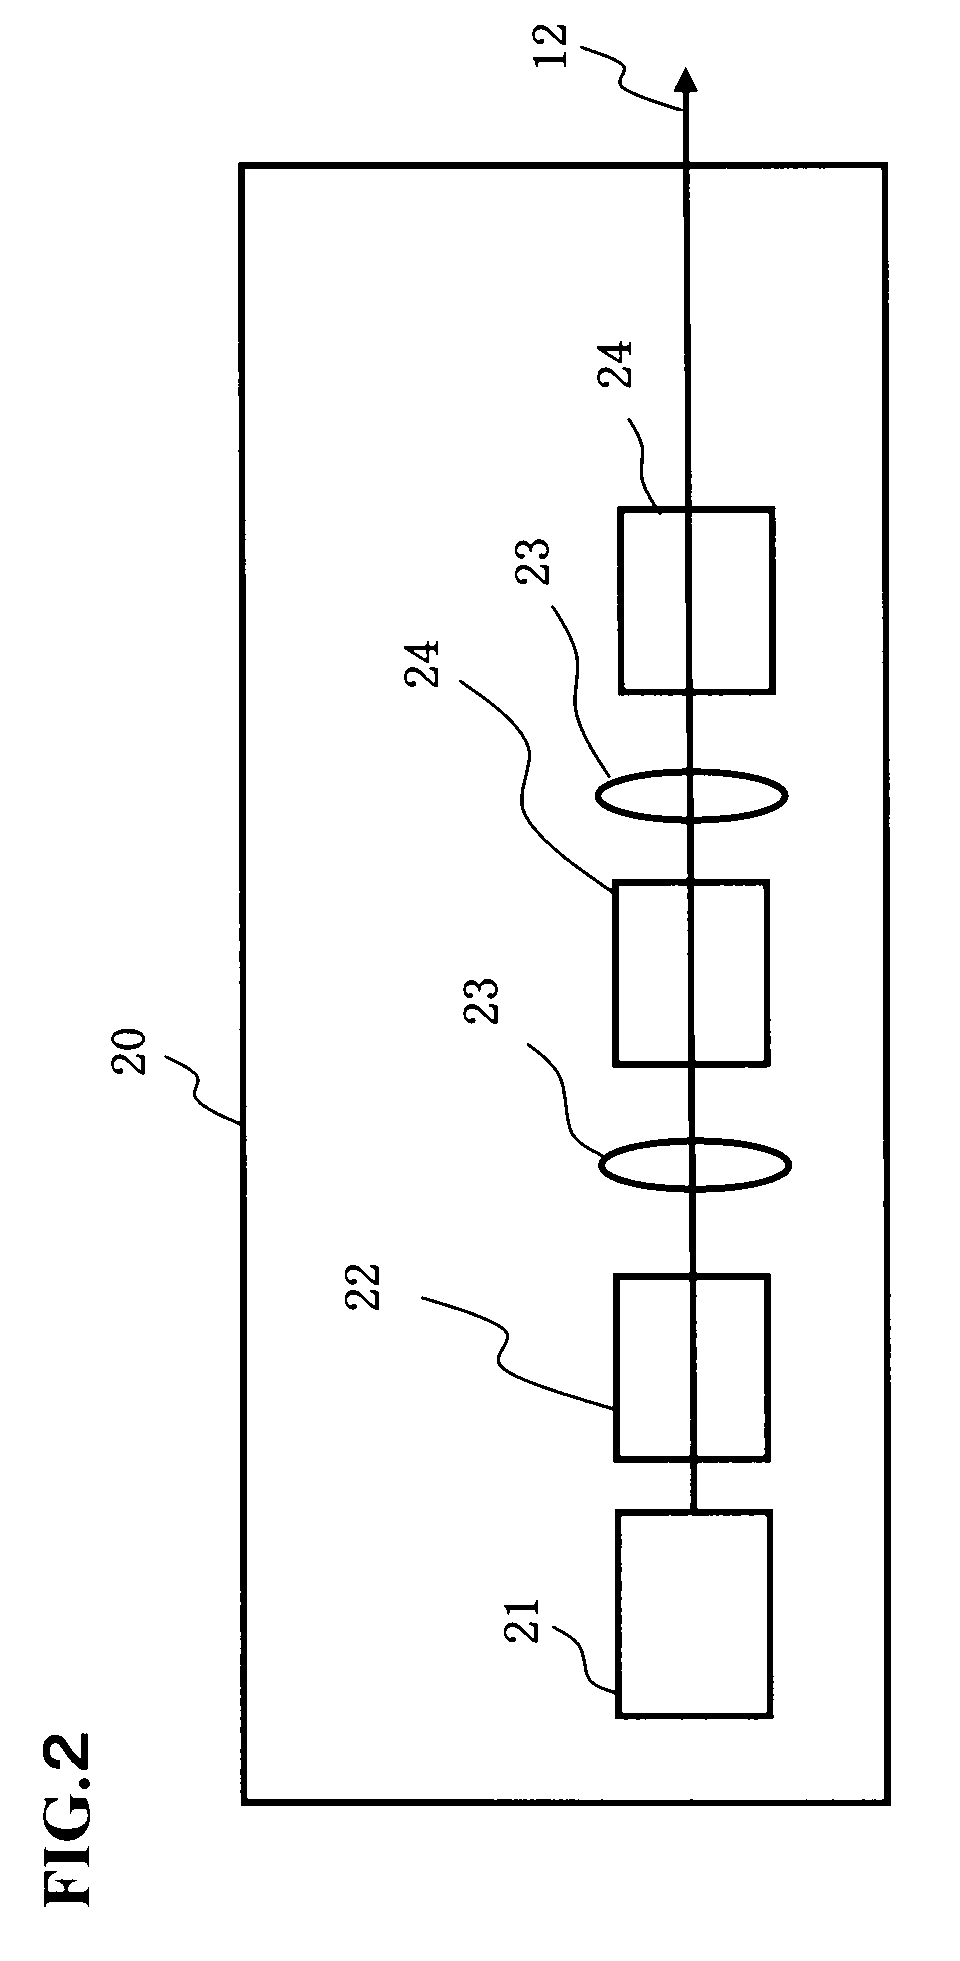 Beam irradiation apparatus with deep ultraviolet light emission device for lithographic pattern inspection system